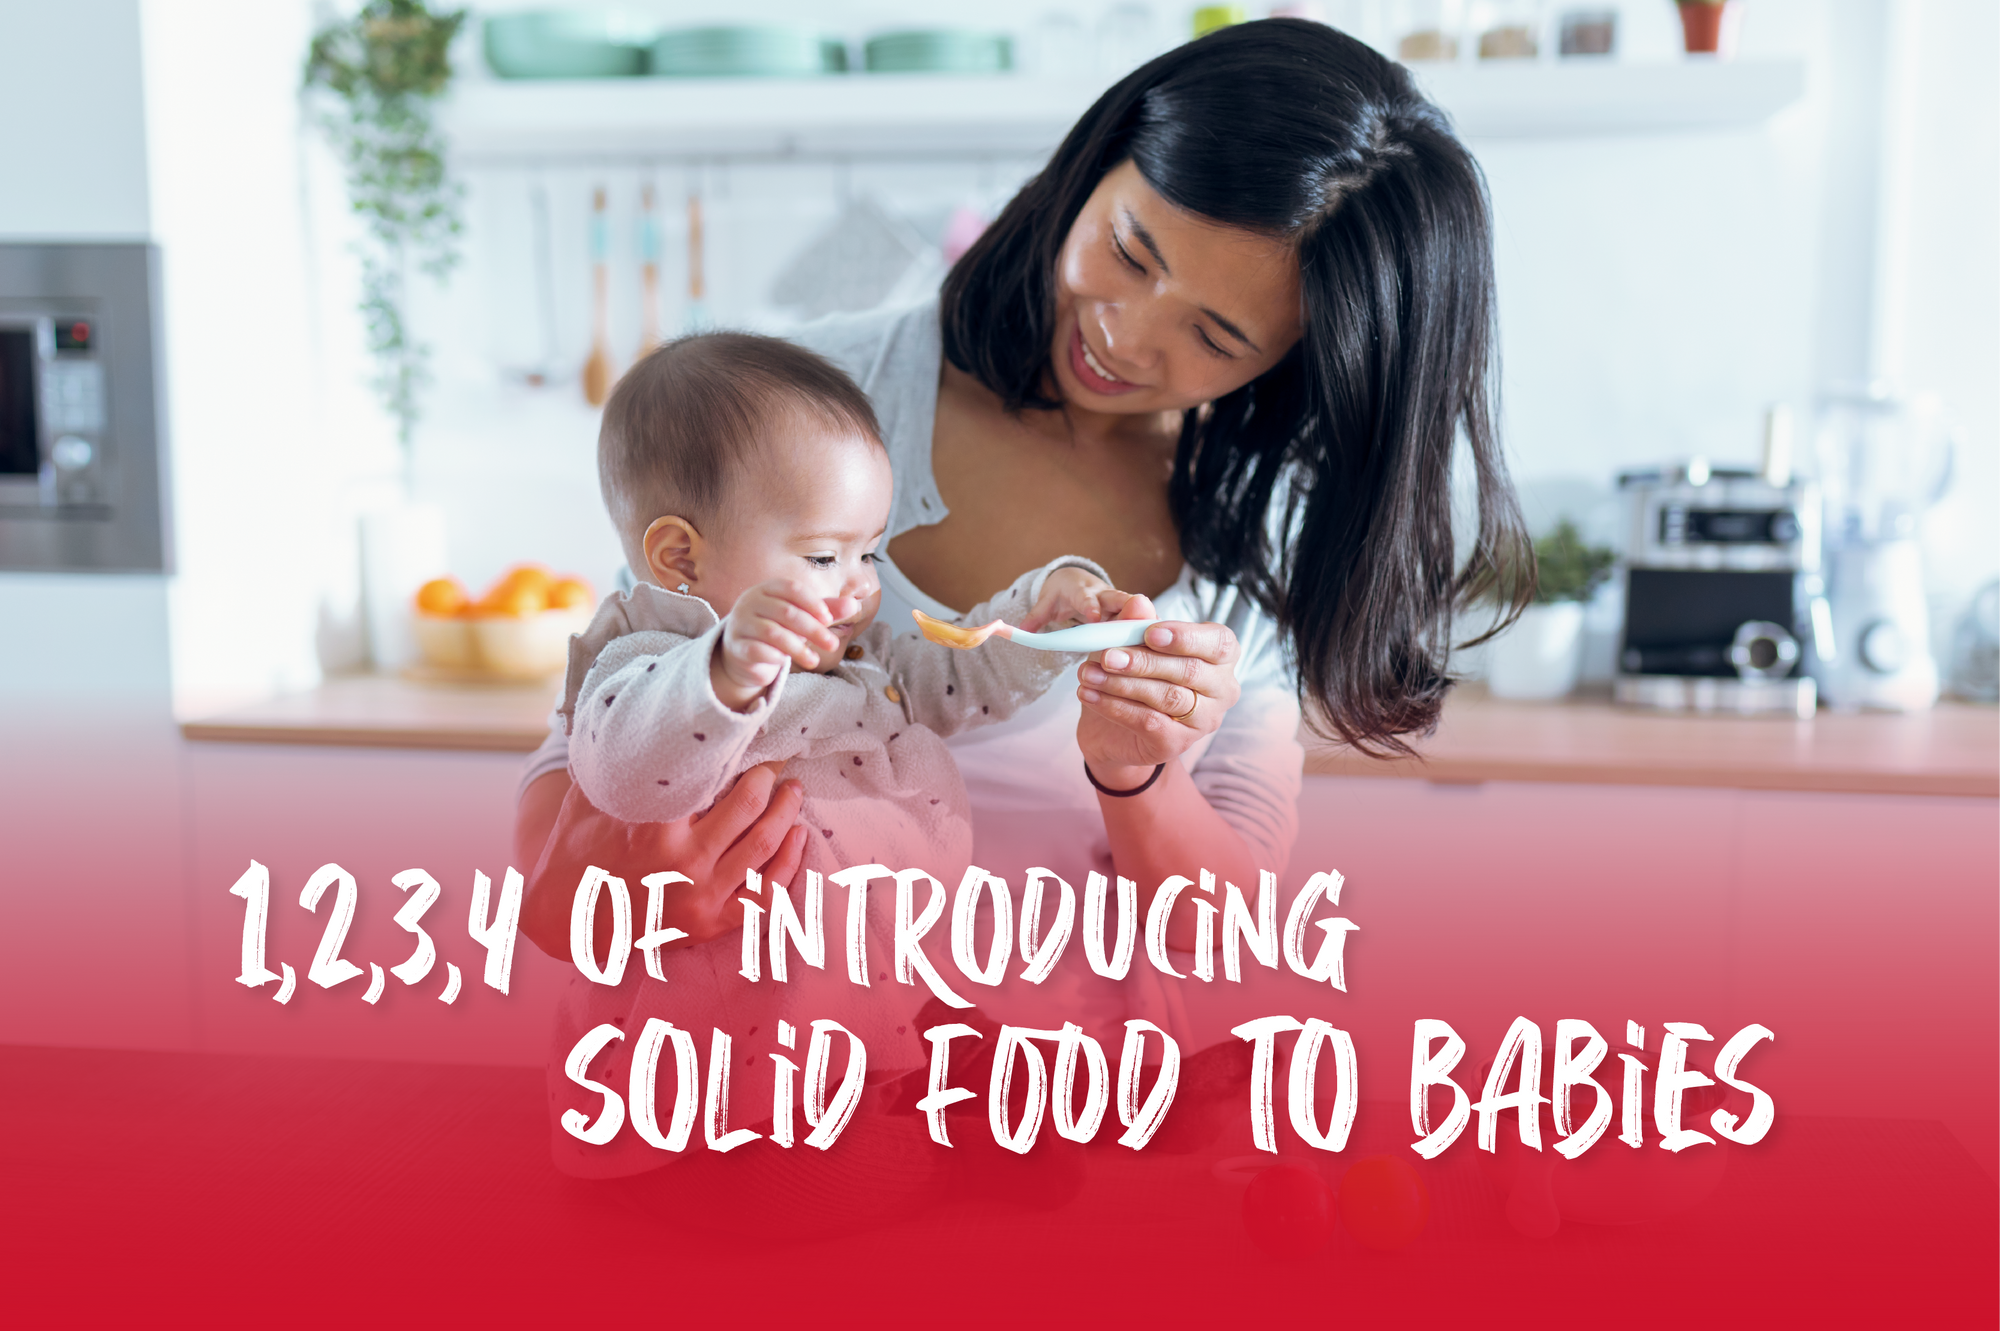 1,2,3,4 of introducing solid food to babies